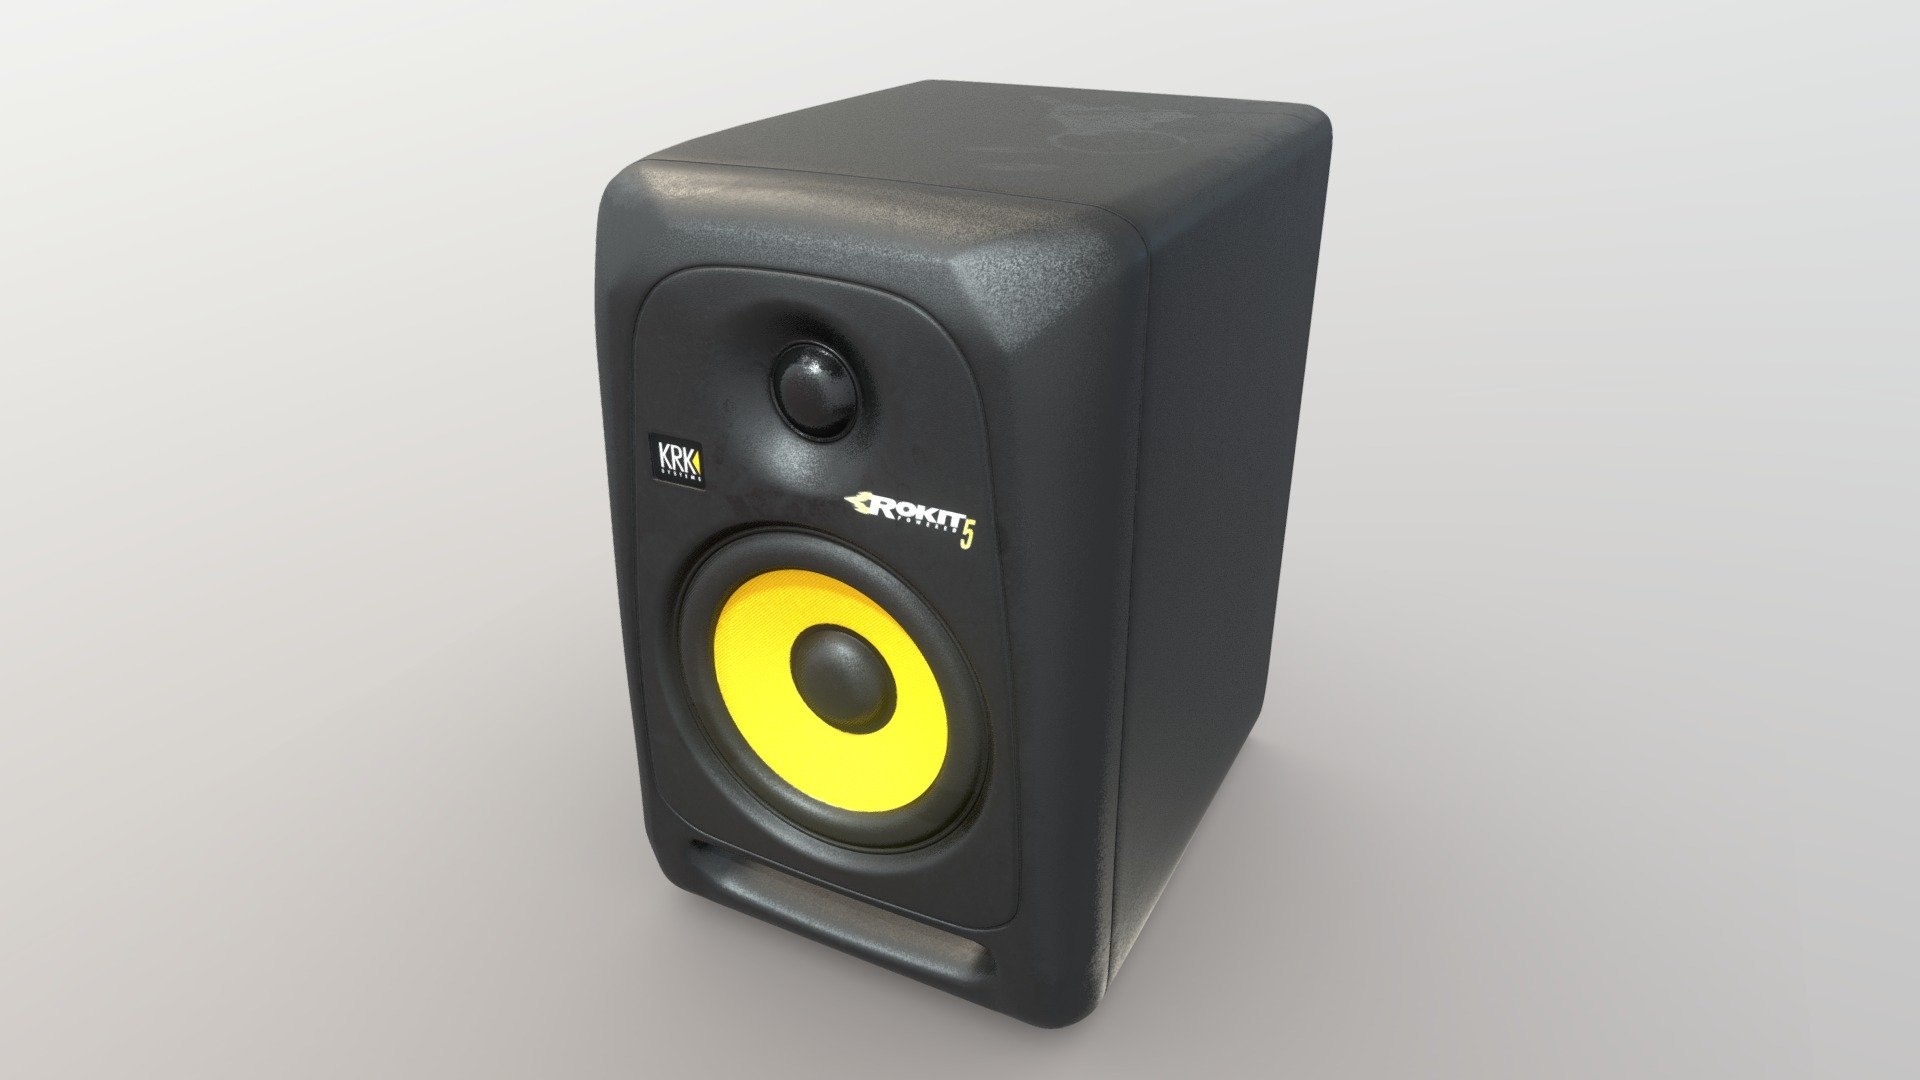 FBX, OBJ, BLEND, TEXTURES
Iconic design of  the 3D modeled KRK Rokit 5 speaker monitor, with the signature yellow aramid glass composite woofer, black protective grille, and angled cabinet 3d model